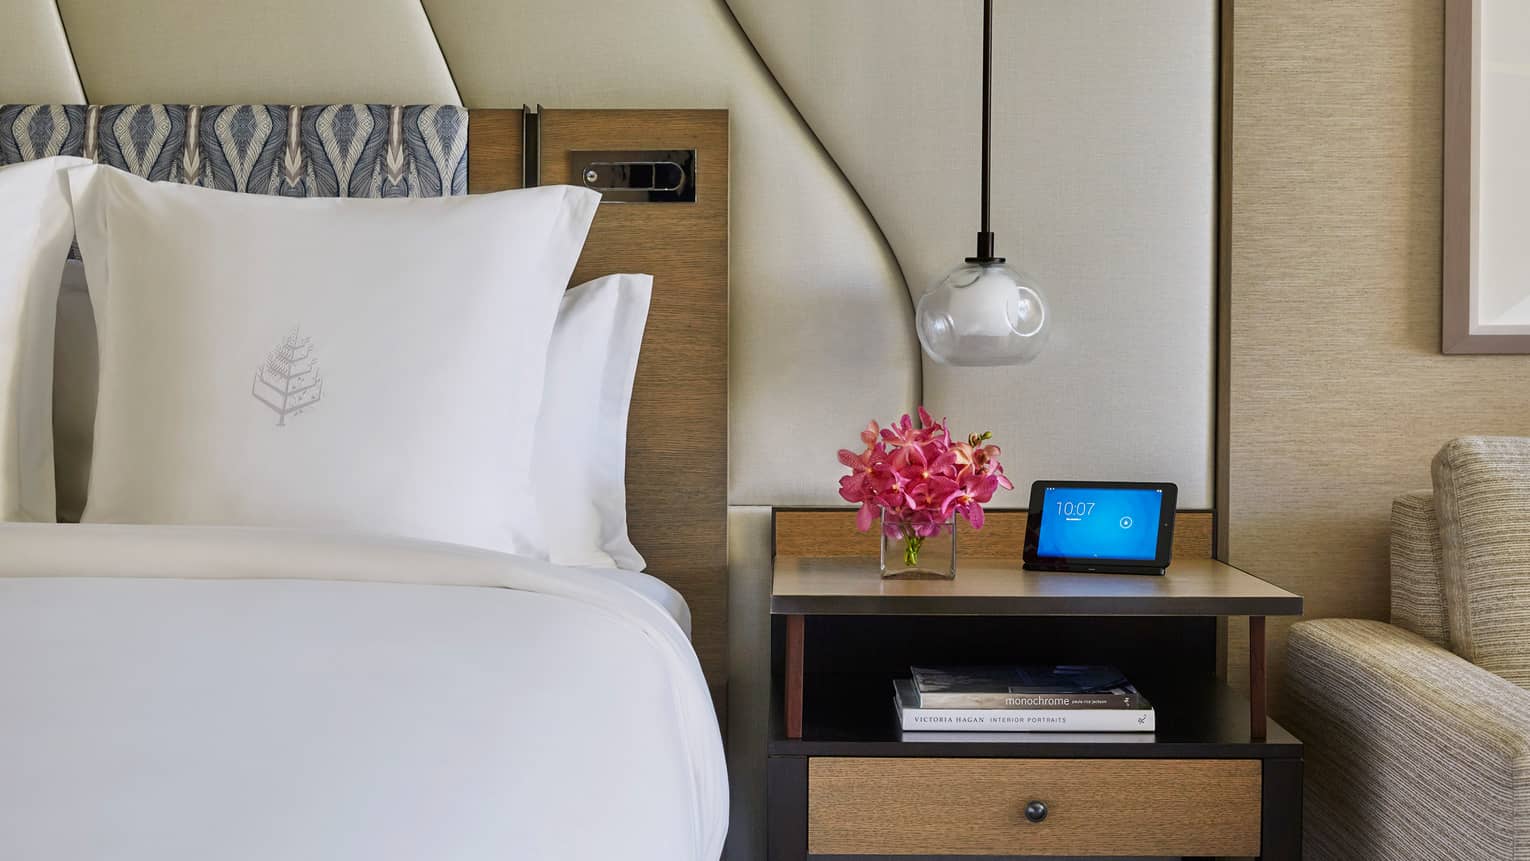 Hotel room with white bed, Four Seasons logo on pillow, large white padded headboard, flowers and ipad on nightstand